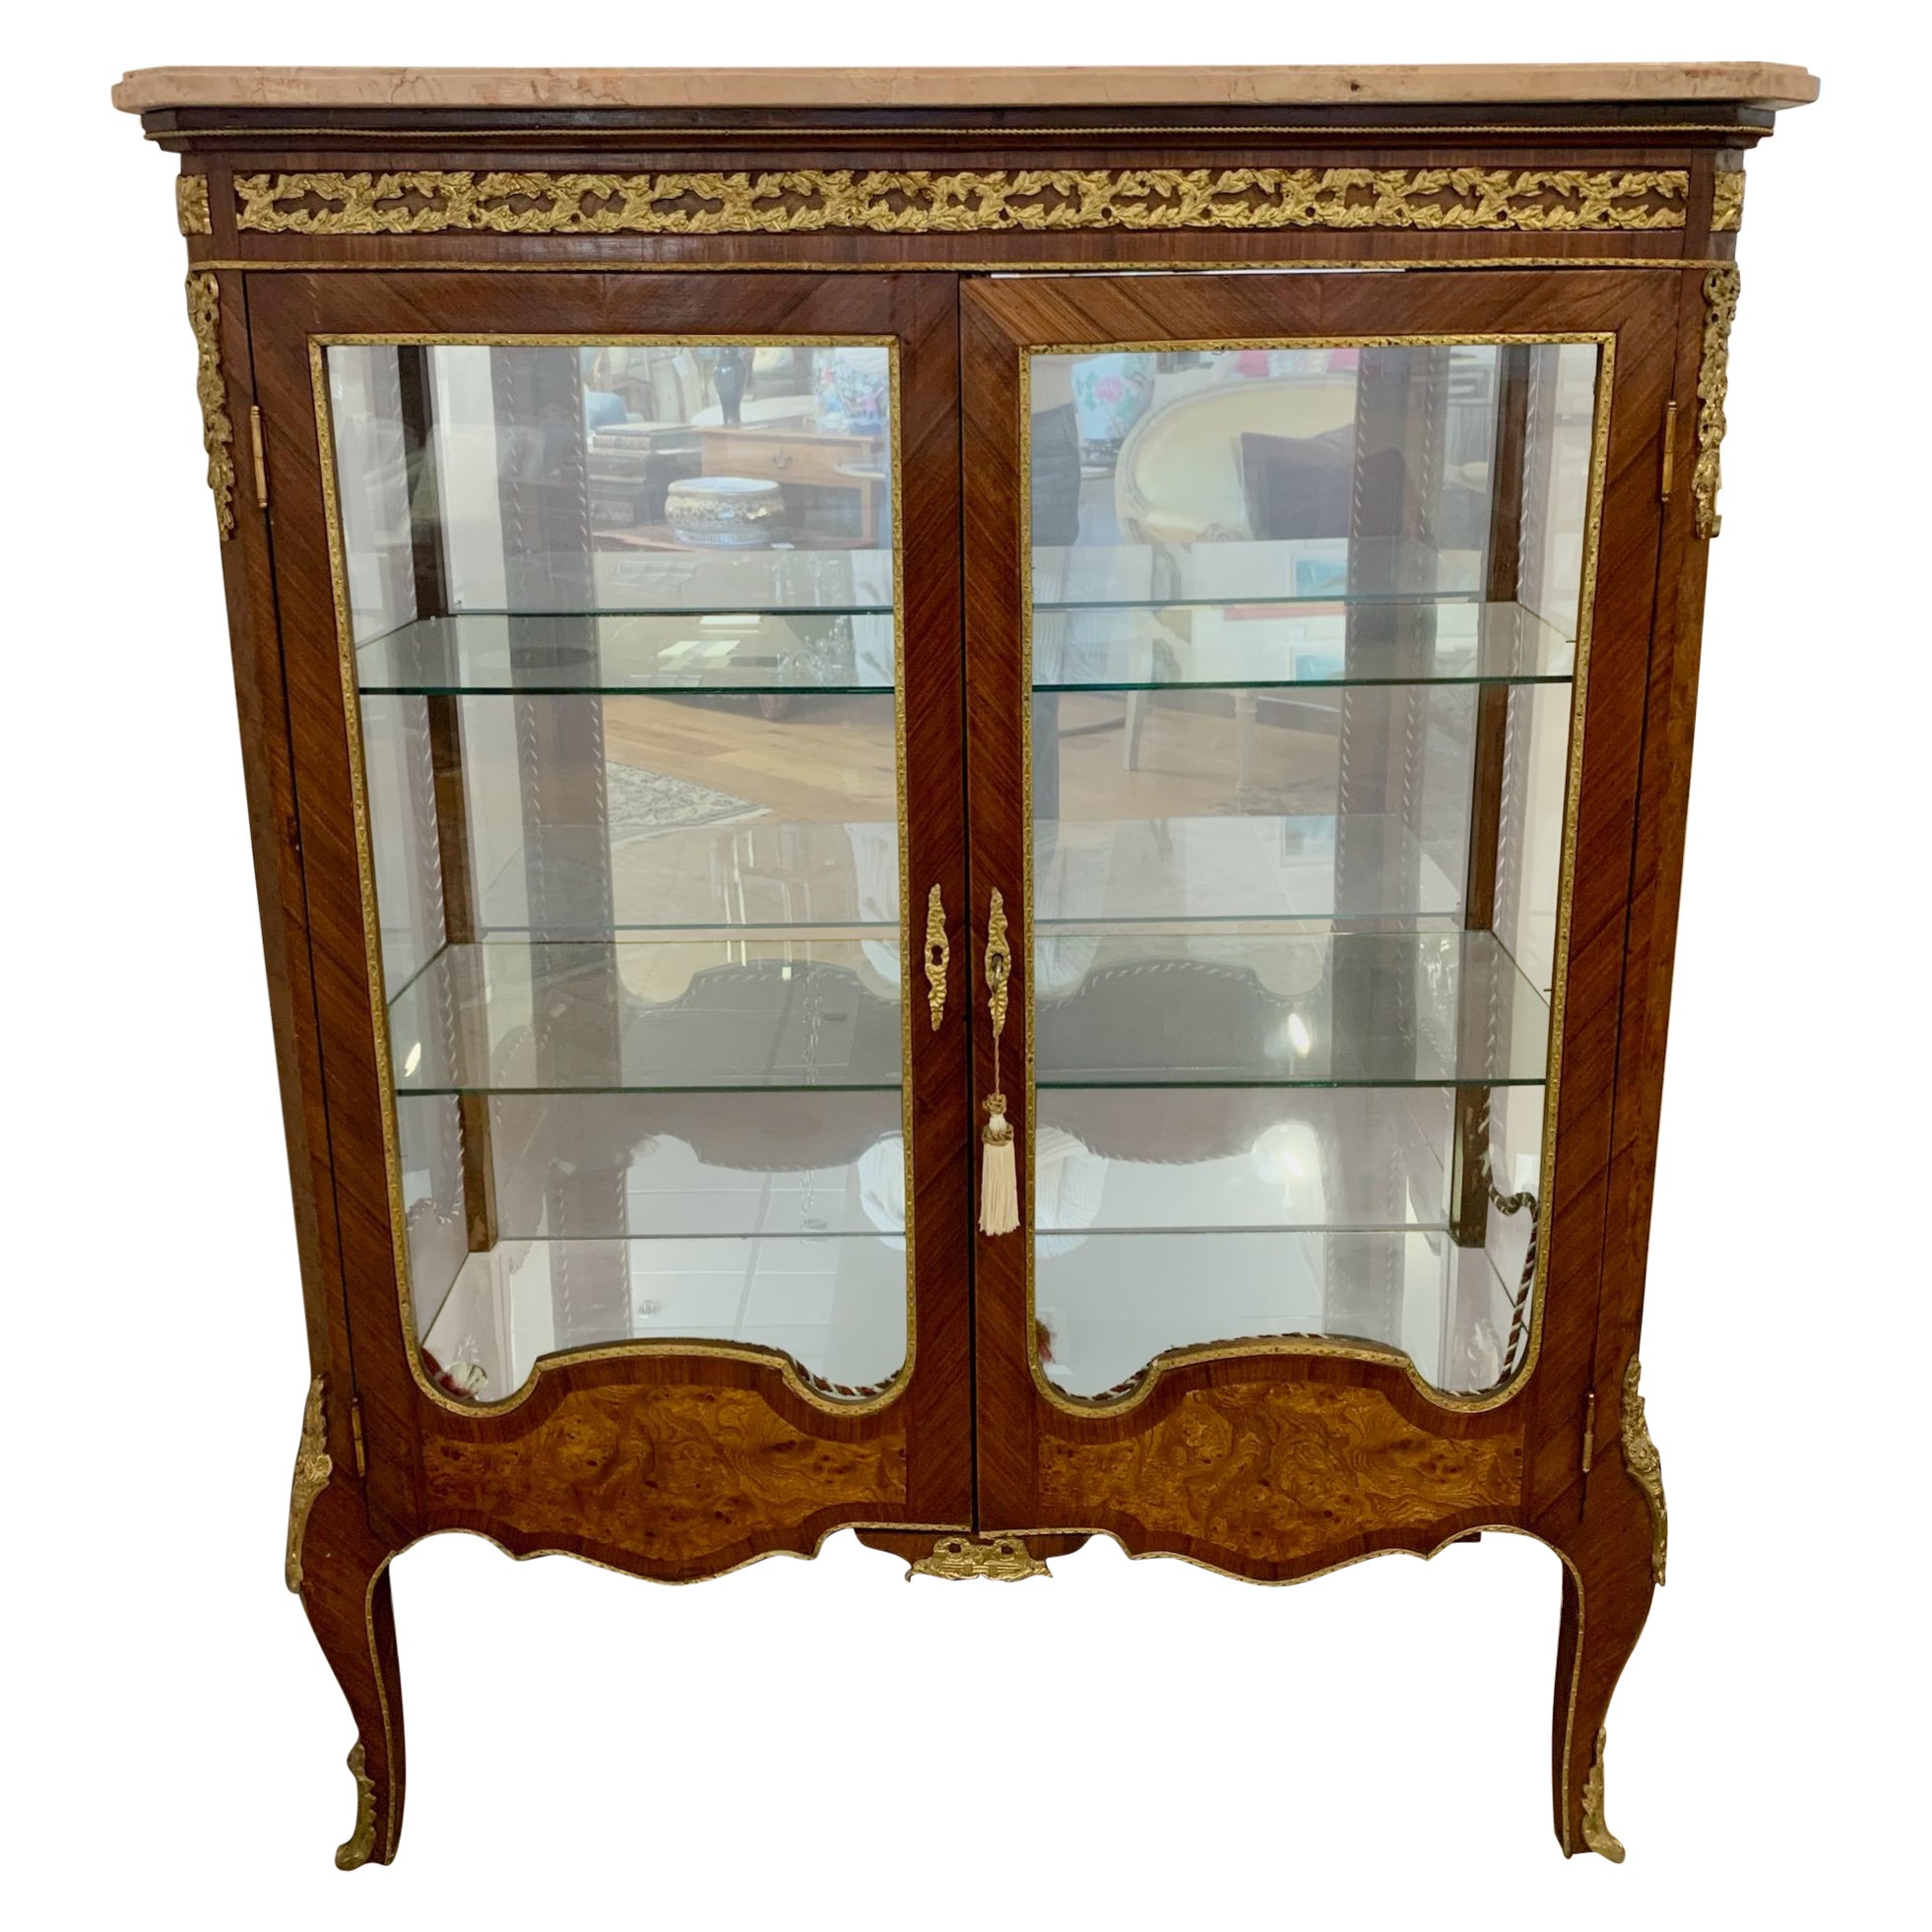 Antique 19th Century French Vitrine Display Cabinet Marble Top